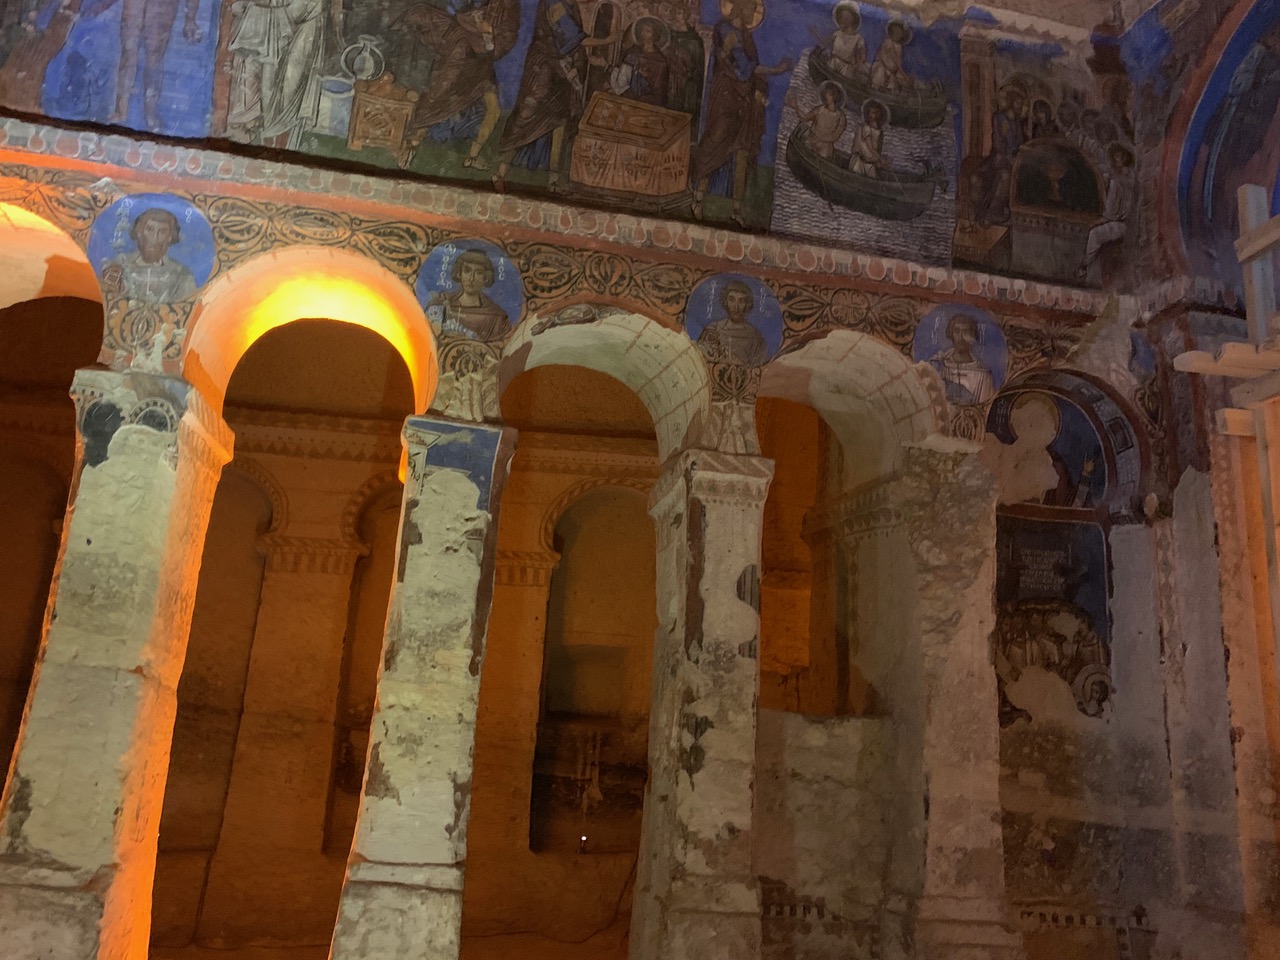 carved pillars and life of Christ frescos in Tokali church with the background a deep blue